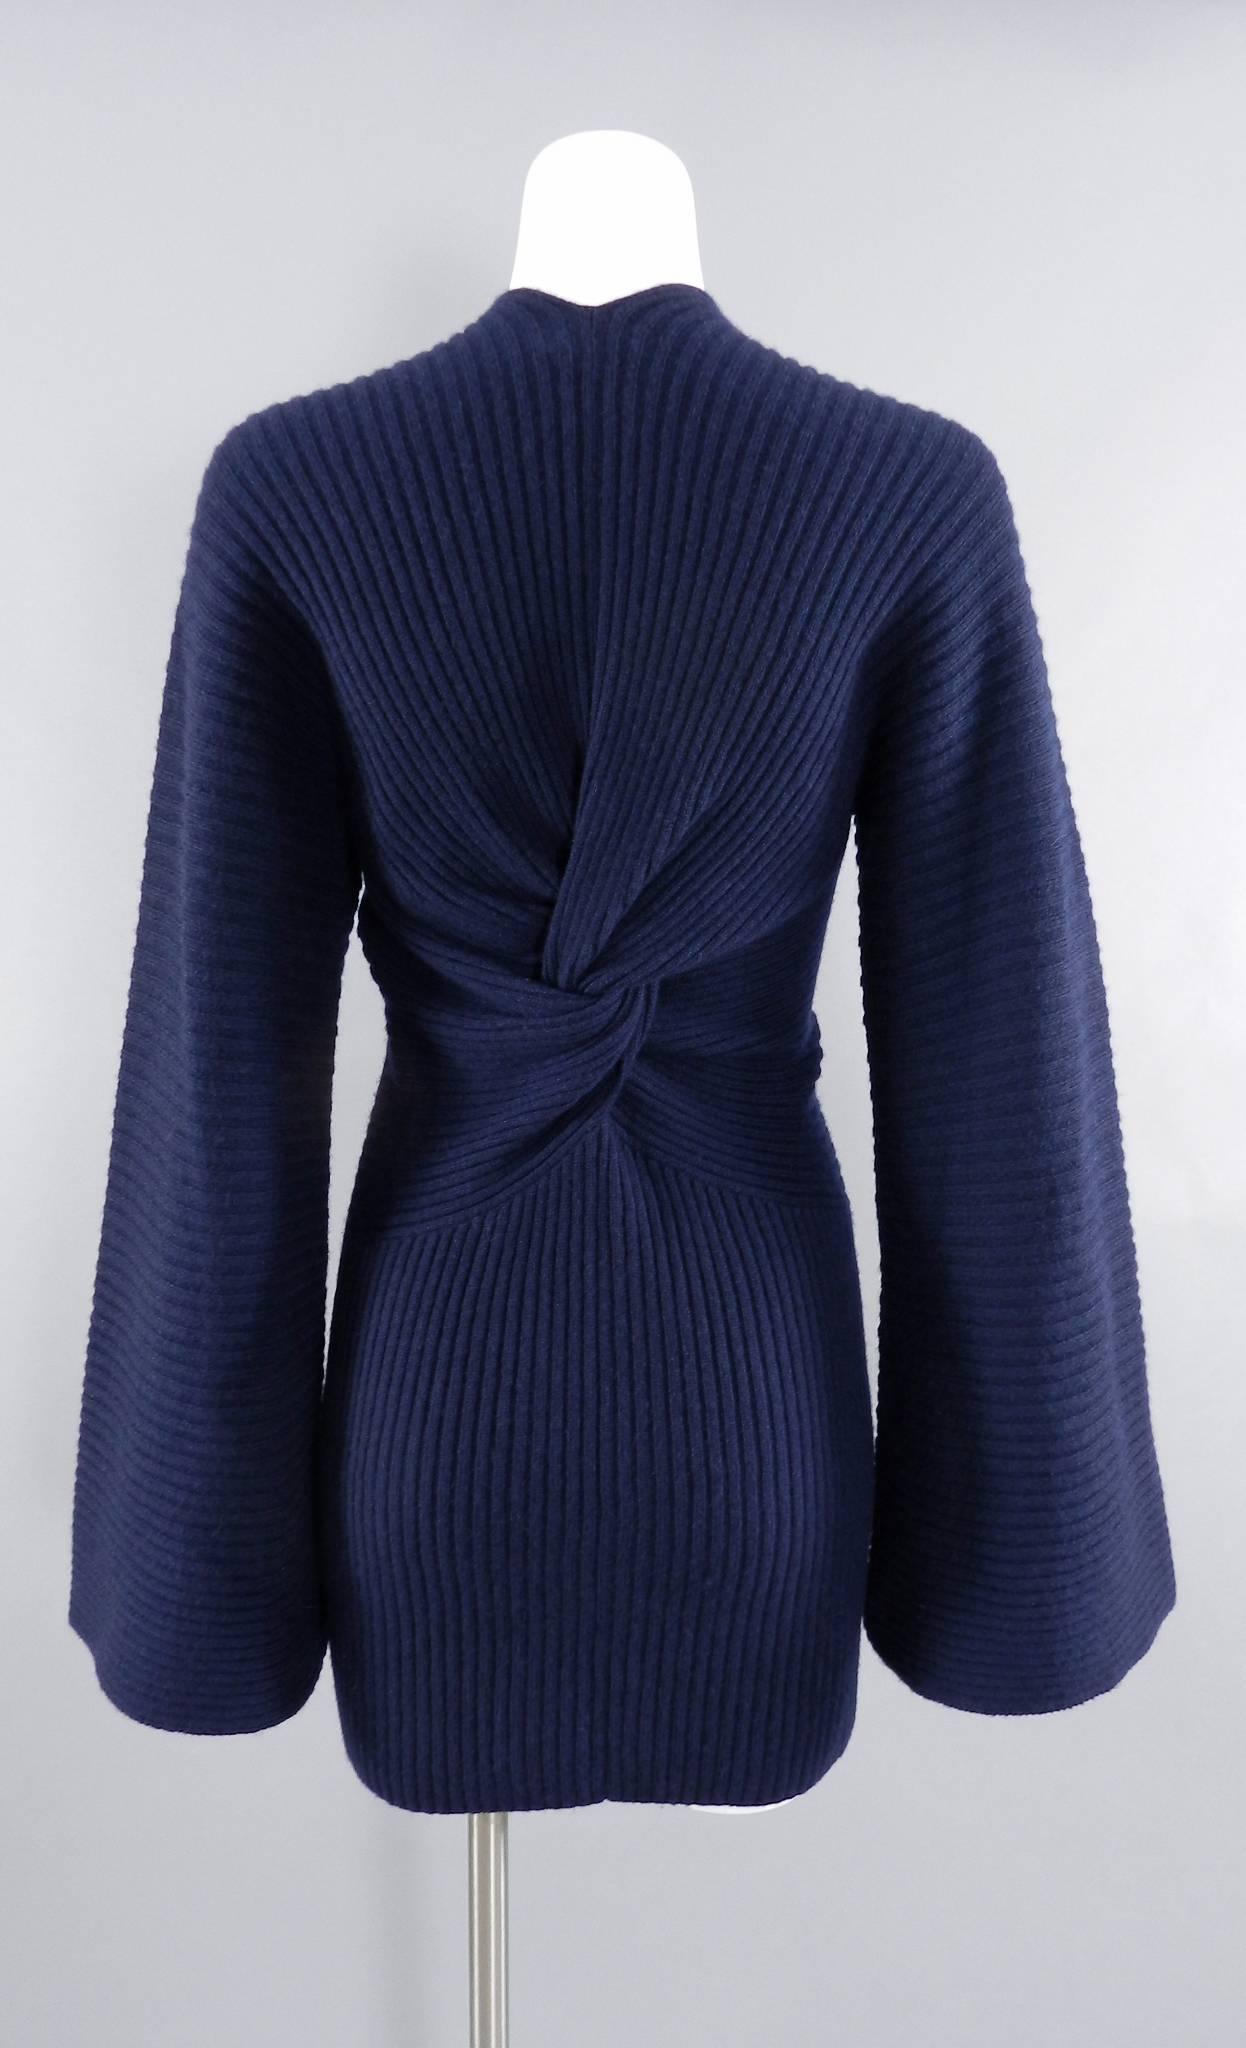 Chanel navy ribbed cashmere sweater with bell sleeves and knot back.   Tagged size FR 40 (about USA 8).  To fit 34-36